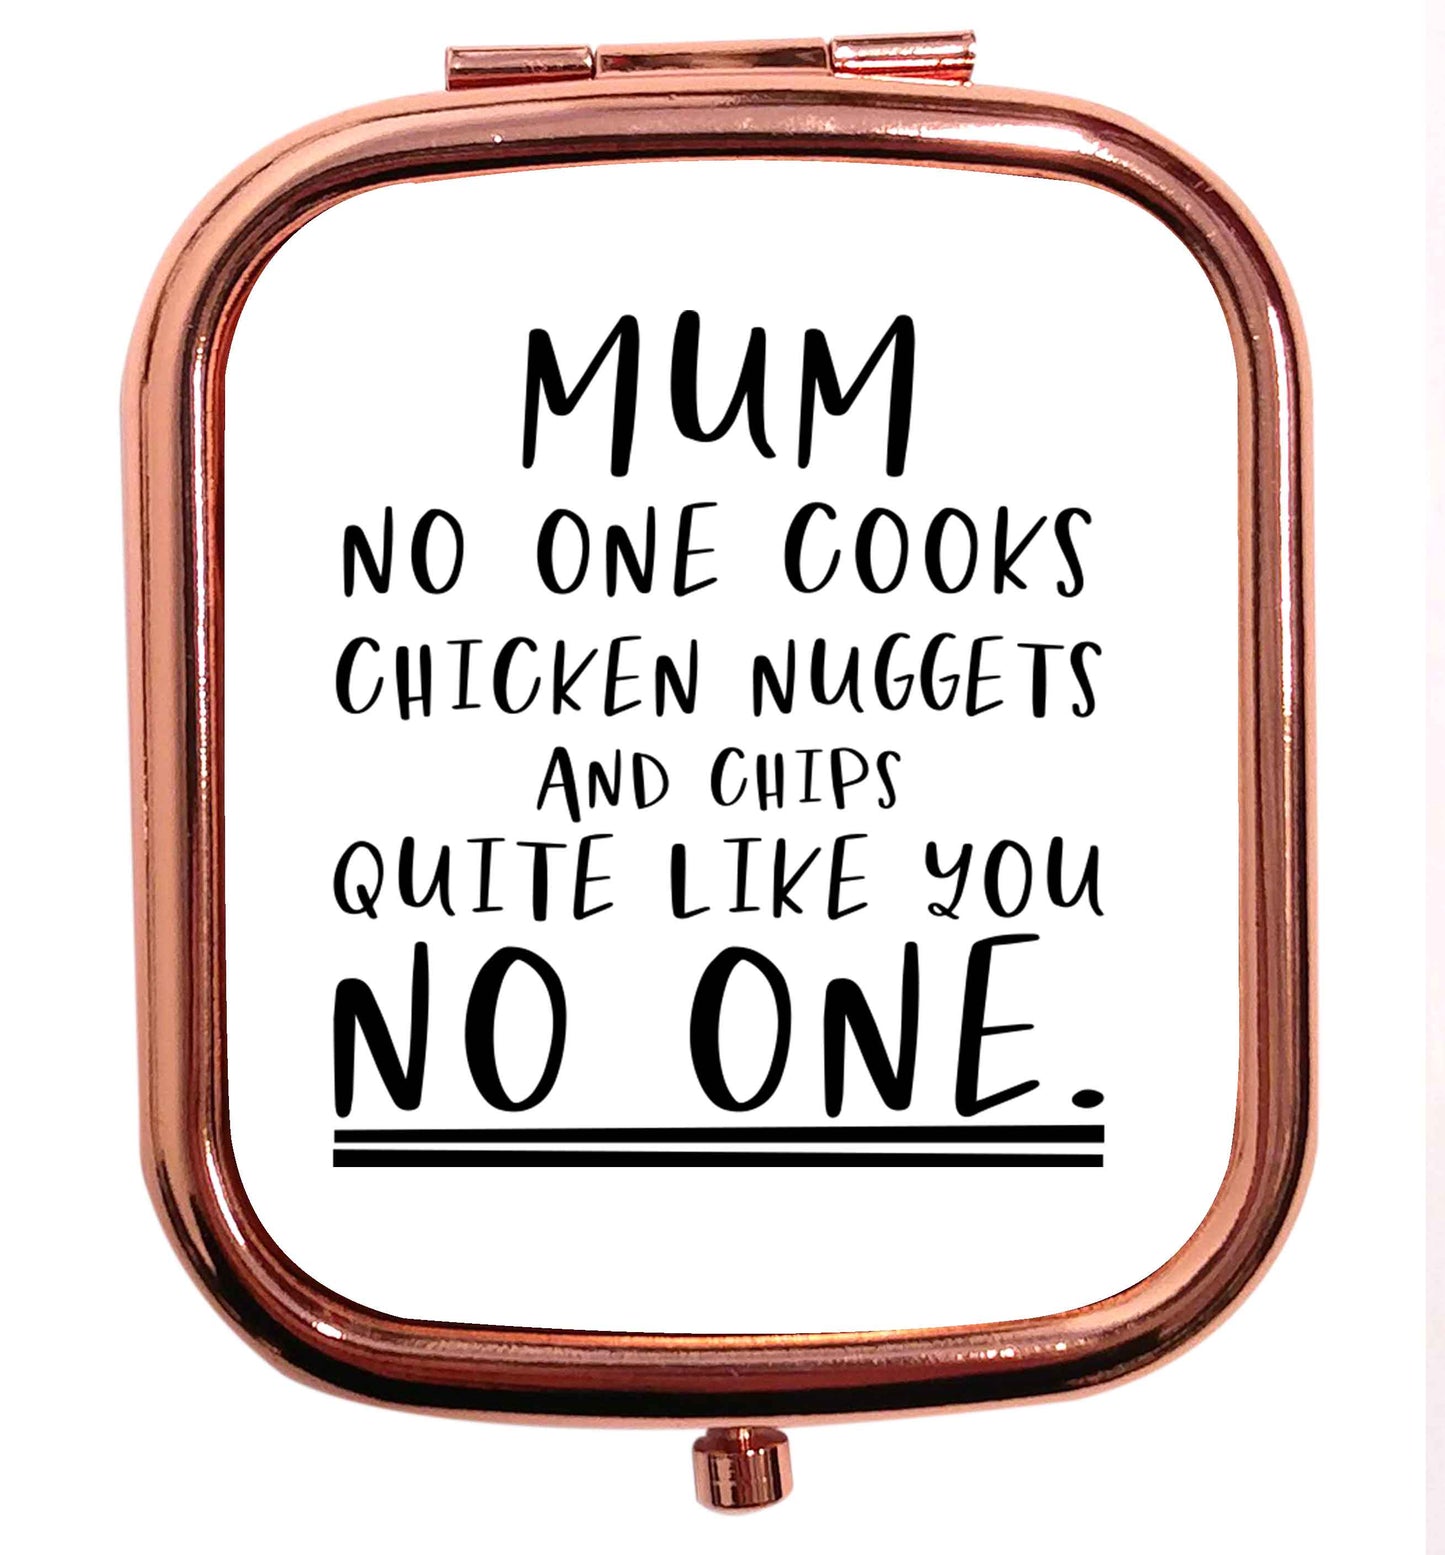 Super funny sassy gift for mother's day or birthday!  Mum no one cooks chicken nuggets and chips like you no one rose gold square pocket mirror